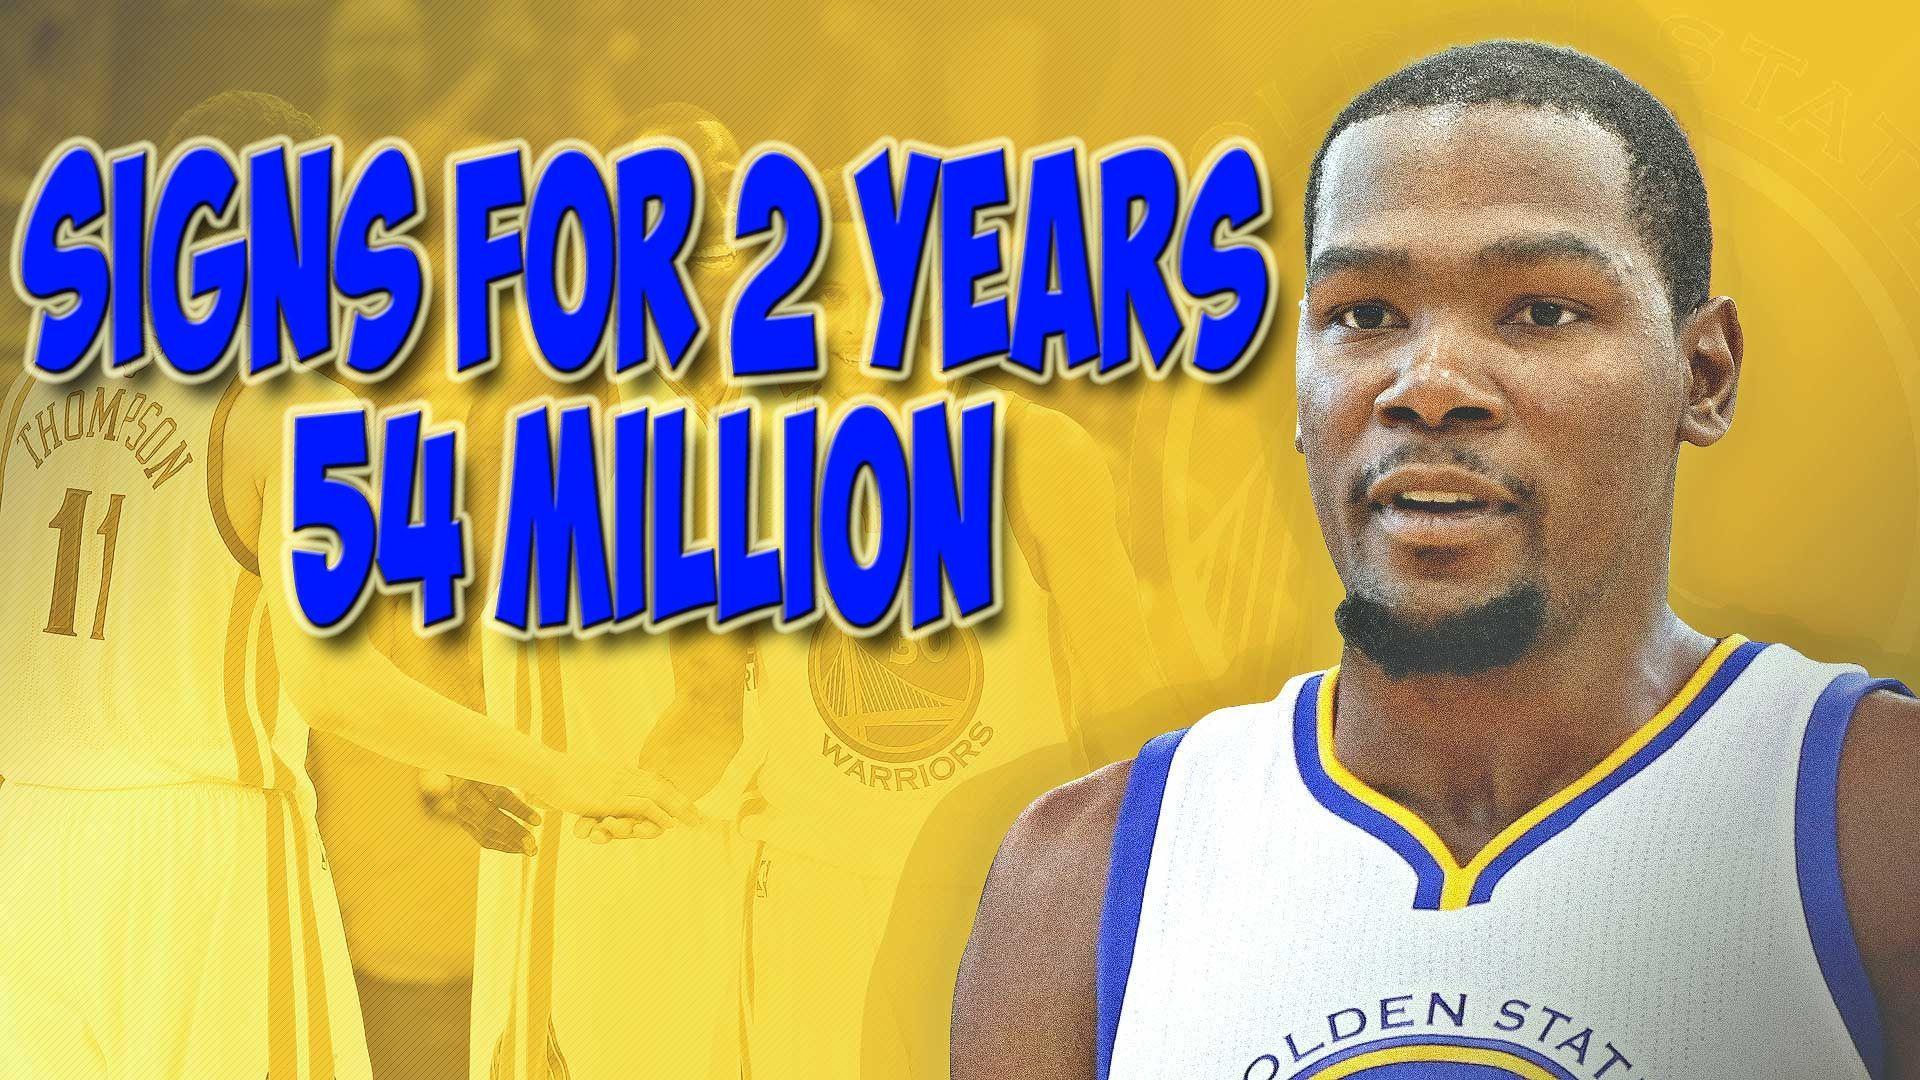 KEVIN DURANT SIGNS TO GOLDEN STATE WARRIORS 2 YEARS 54 MILLION